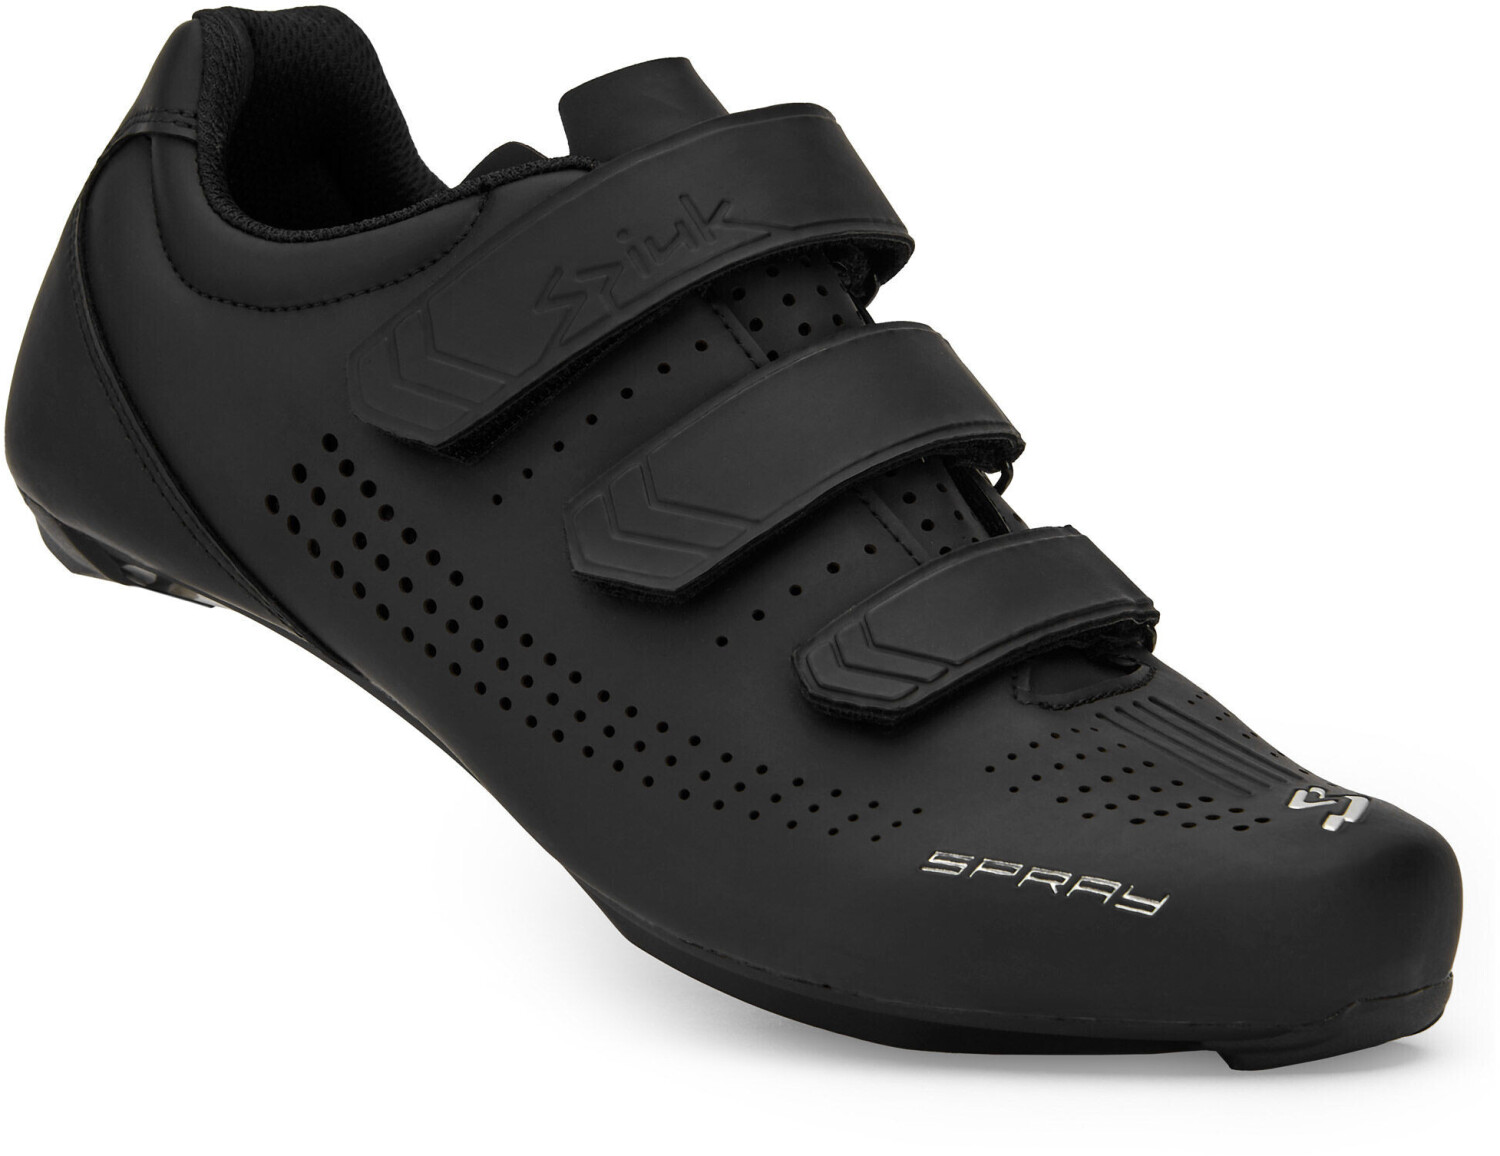 Photos - Cycling Shoes Spiuk Spiuk Spray black/black